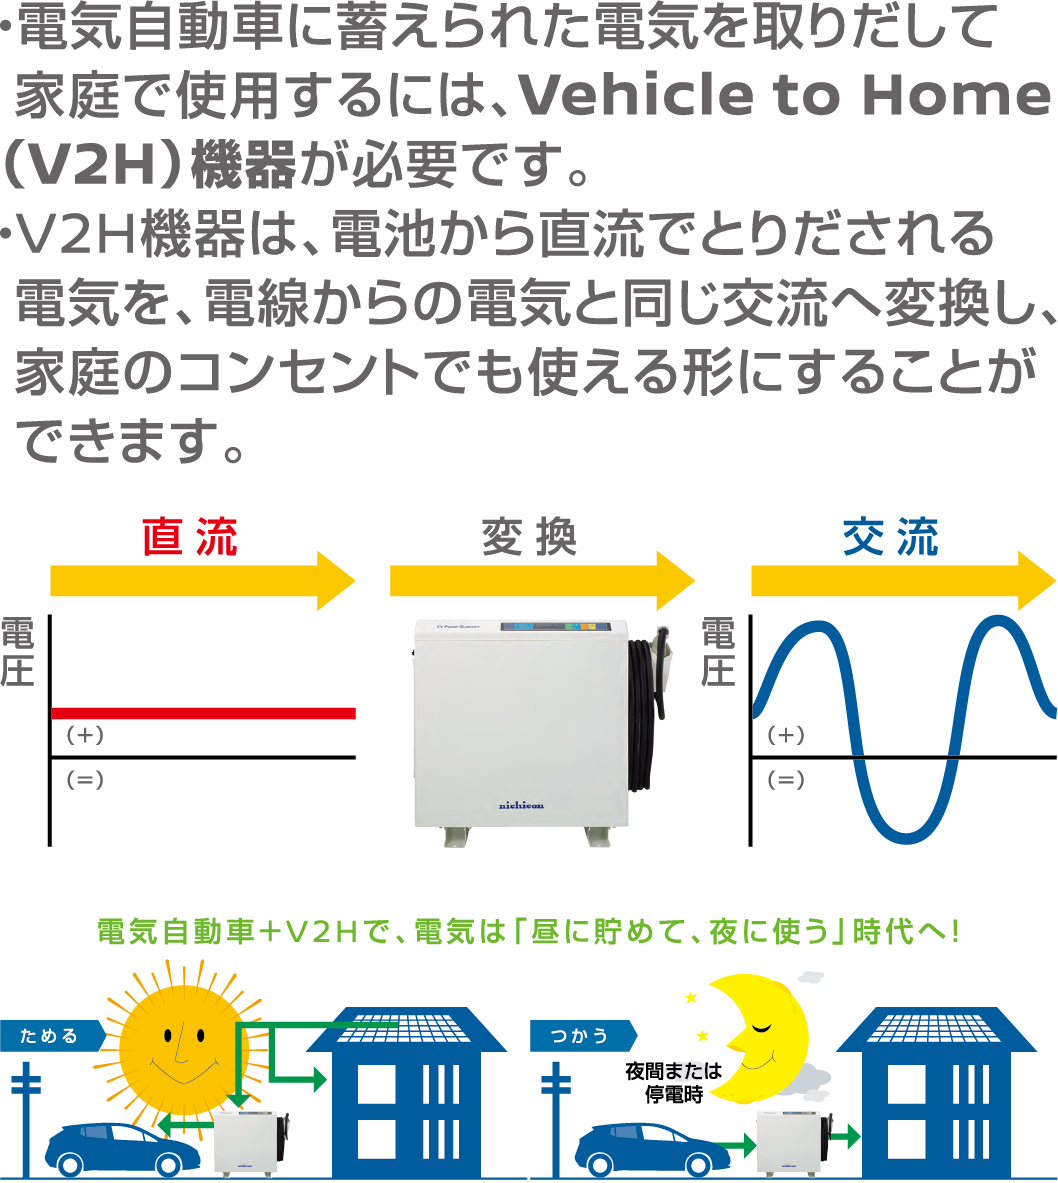 Vehicle to Home とは？